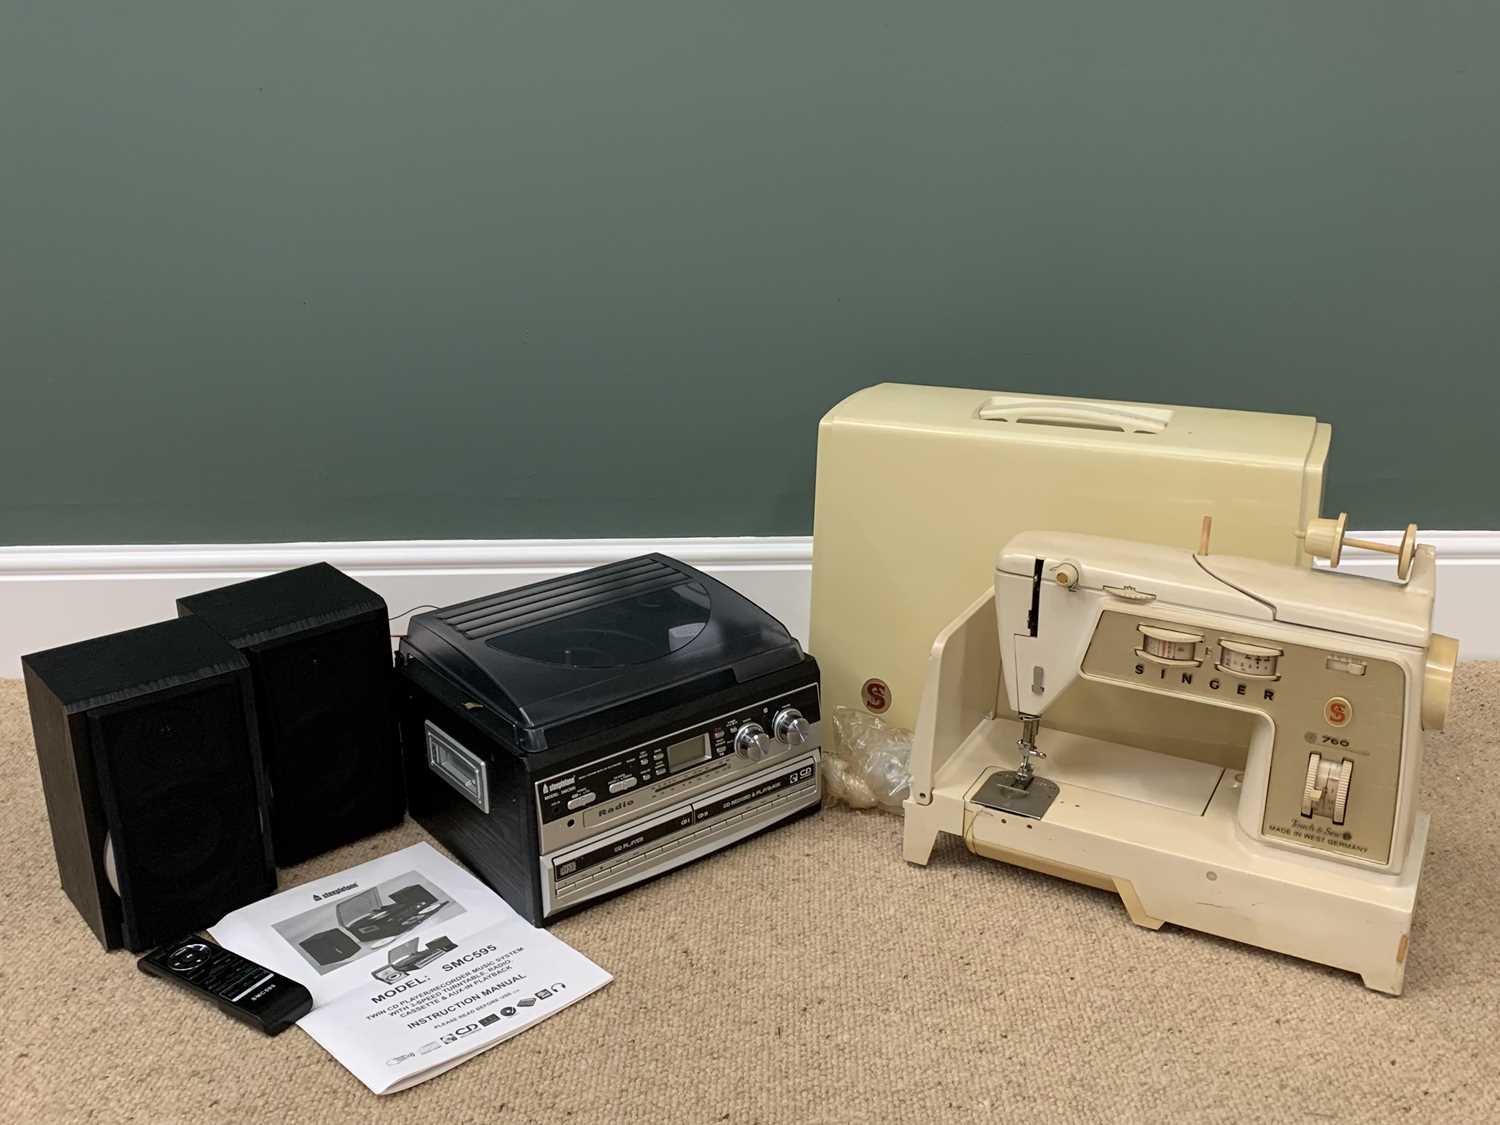 SINGER 760 'TOUCH & SEW' SEWING MACHINE, in case and a Steepletone SMC595 hifi system with